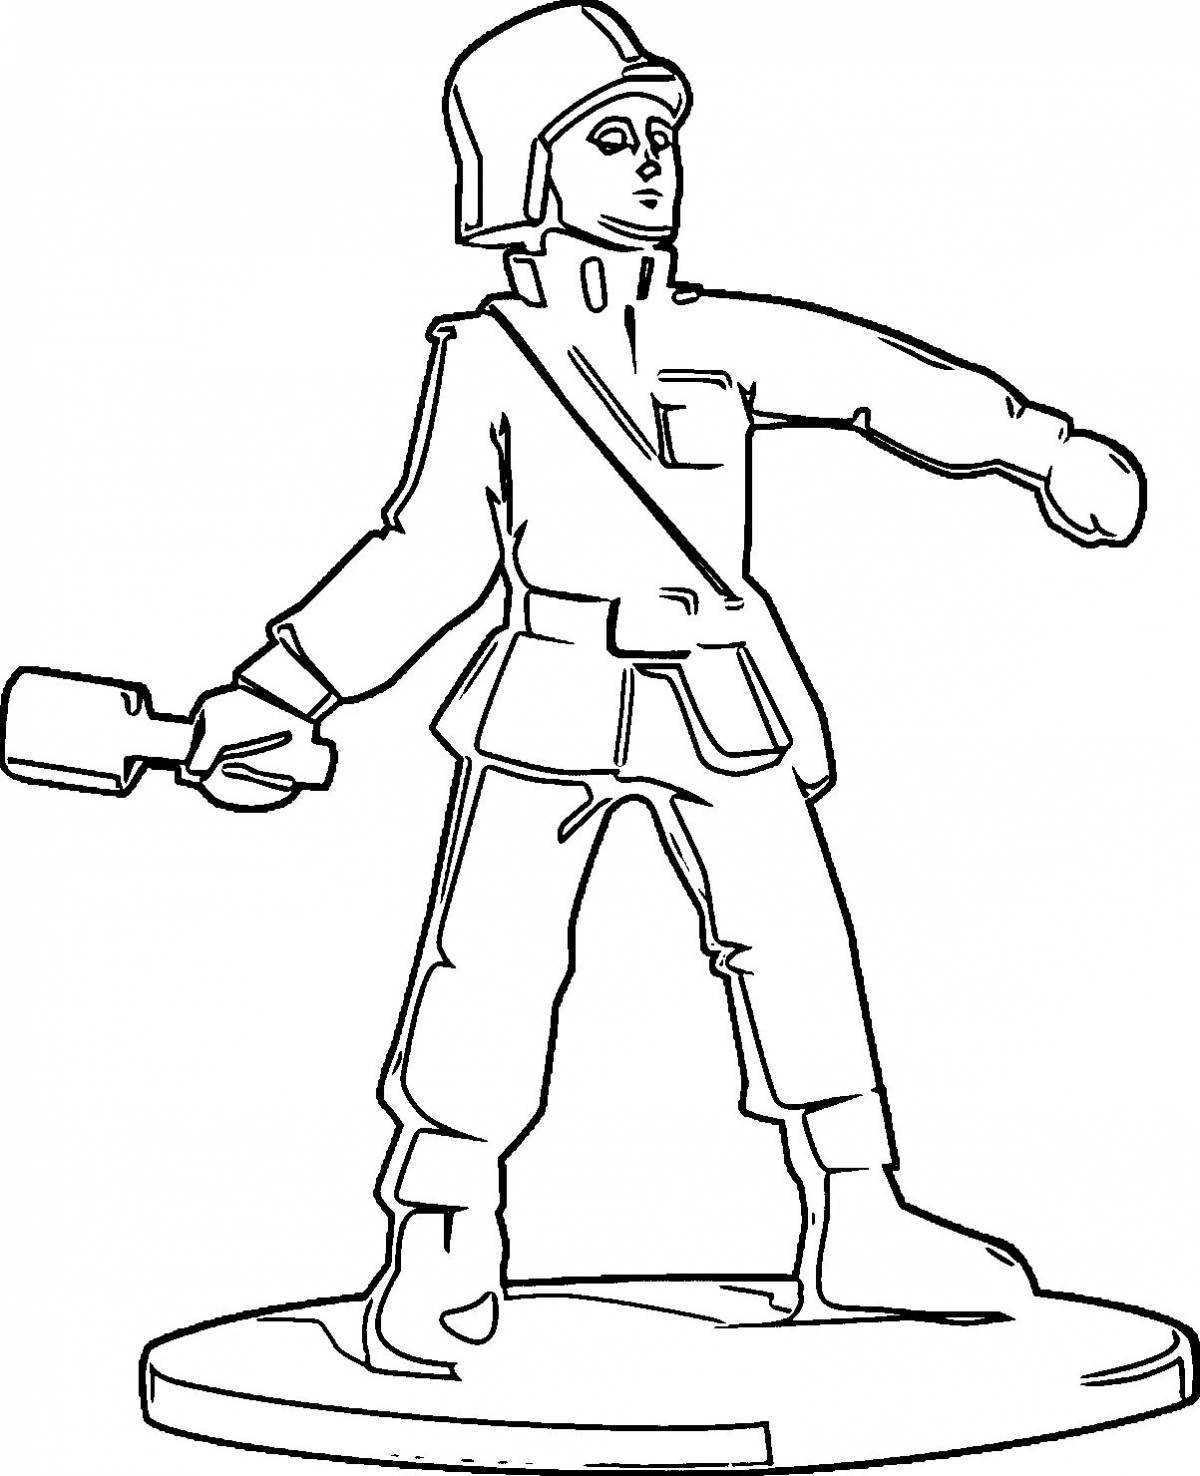 Animated toy soldiers coloring pages for boys